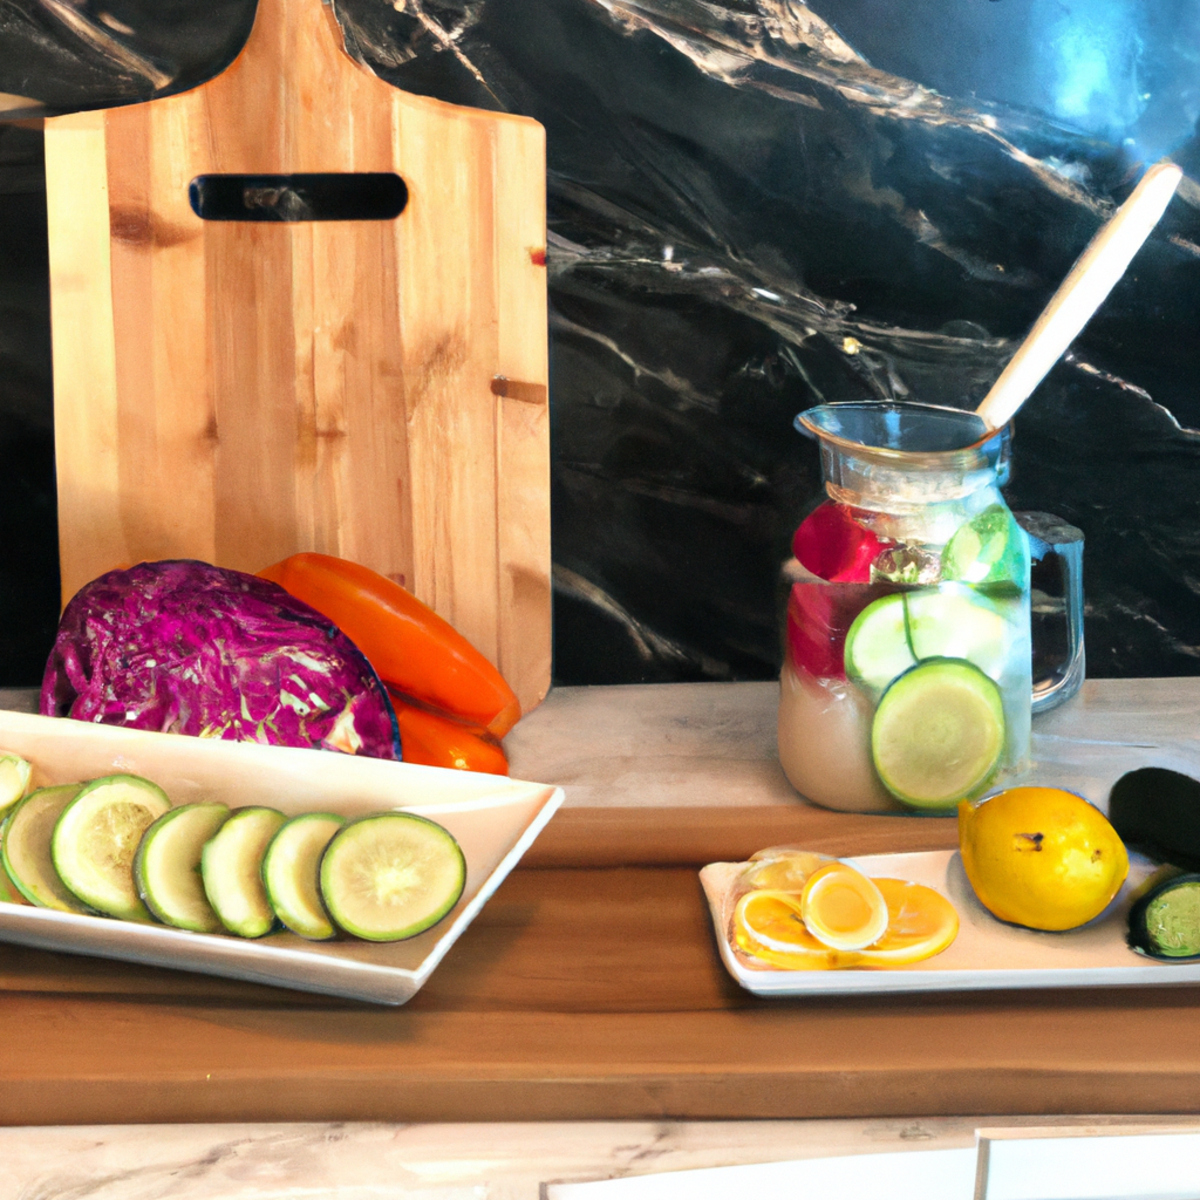 The photo features a wooden cutting board with a variety of colorful fruits and vegetables arranged neatly on top. A glass jar of homemade sauerkraut sits next to the board, with a small spoon resting on top. In the background, a pitcher of water with slices of lemon and cucumber can be seen, emphasizing the importance of hydration for gut health. The vibrant colors of the produce and the natural textures of the wood and glass create a warm and inviting image, suggesting the benefits of incorporating probiotics and whole foods into one's diet.